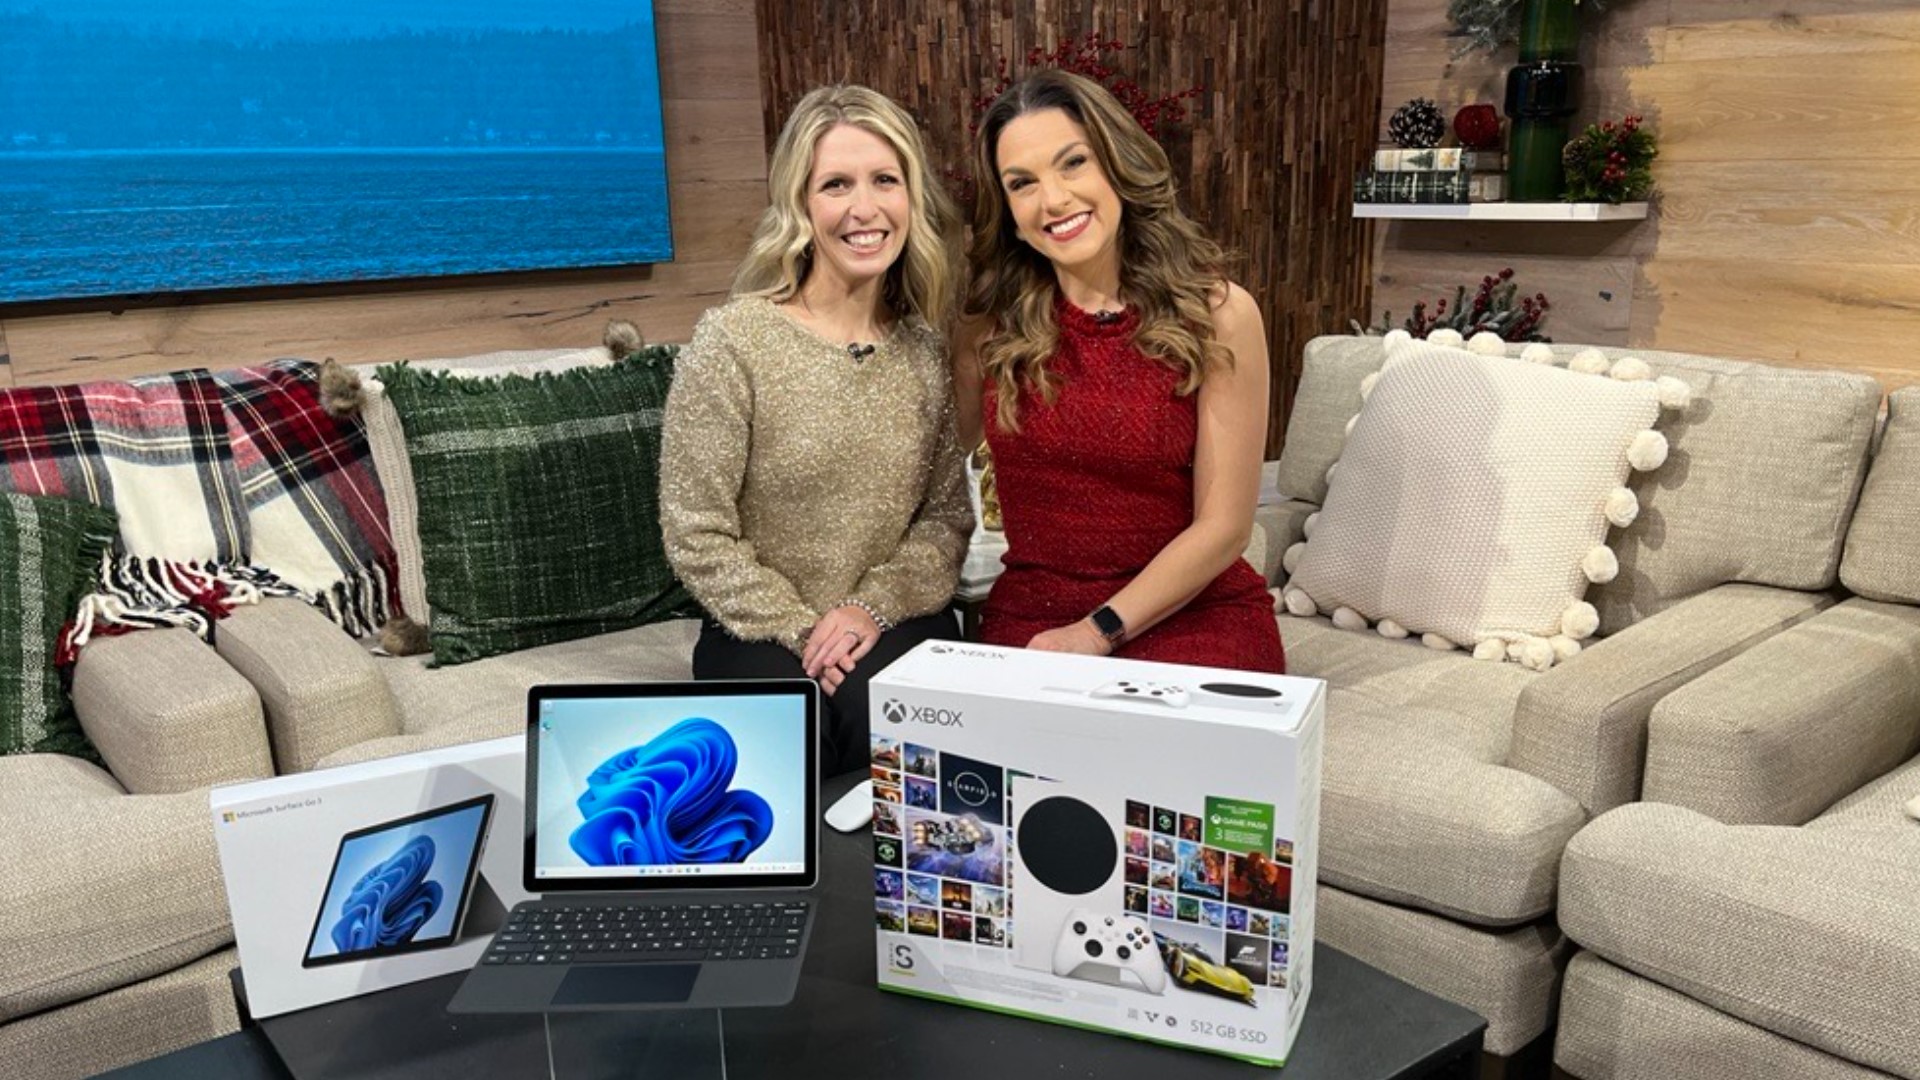 Danita Turner from Microsoft Store shows off tech that'll make perfect gifts and take out gift giving stress this holiday season. Sponsored by Microsoft.